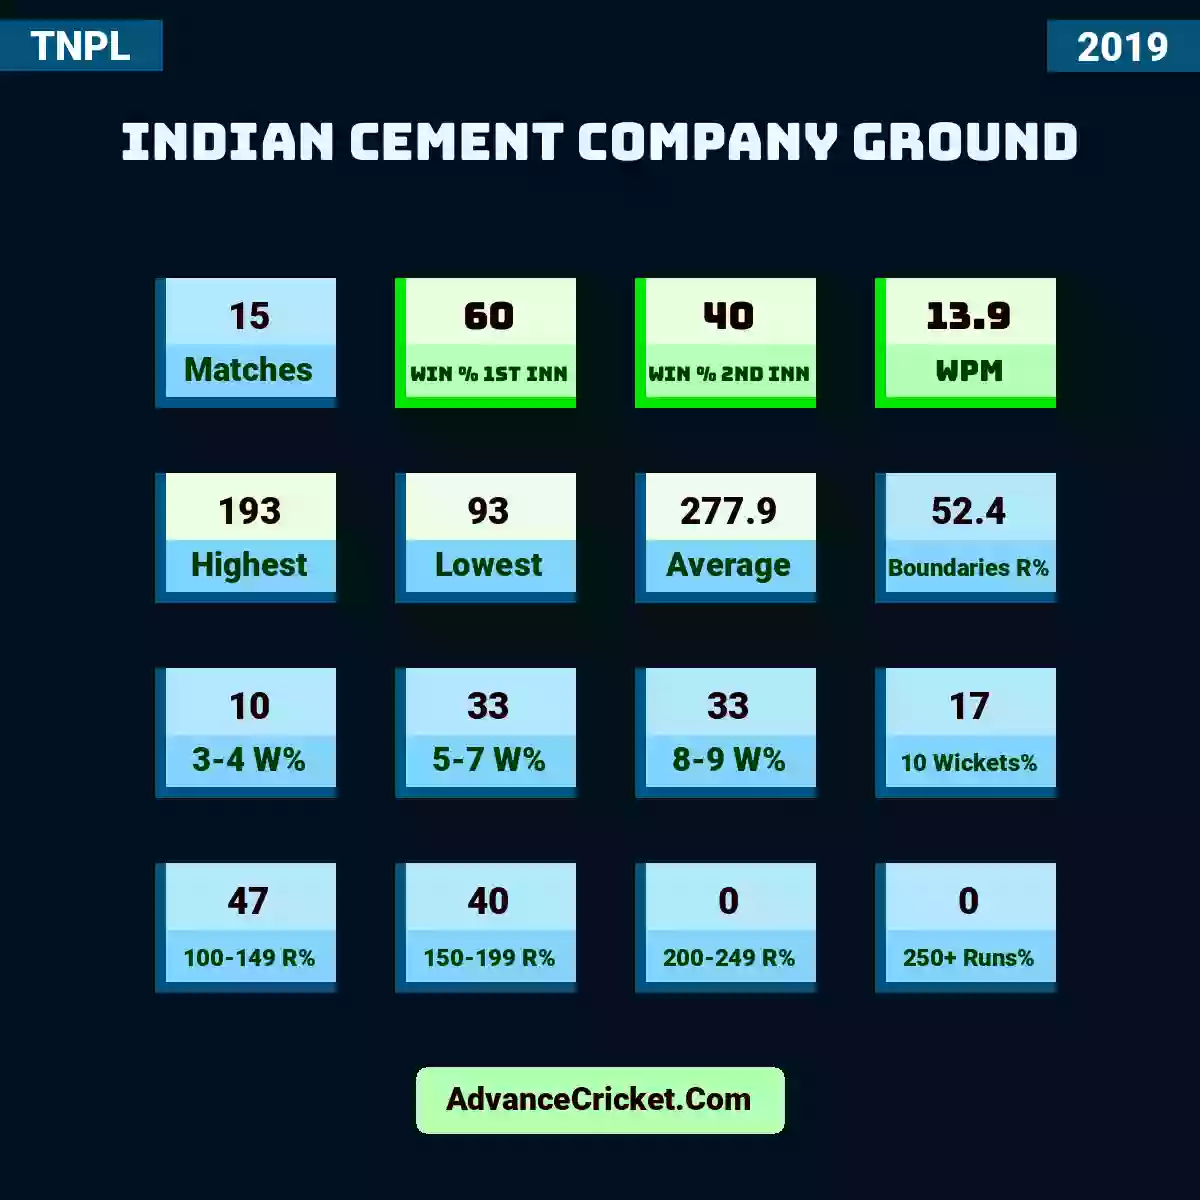 Image showing Indian Cement Company Ground with Matches: 15, Win % 1st Inn: 60, Win % 2nd Inn: 40, WPM: 13.9, Highest: 193, Lowest: 93, Average: 277.9, Boundaries R%: 52.4, 3-4 W%: 10, 5-7 W%: 33, 8-9 W%: 33, 10 Wickets%: 17, 100-149 R%: 47, 150-199 R%: 40, 200-249 R%: 0, 250+ Runs%: 0.